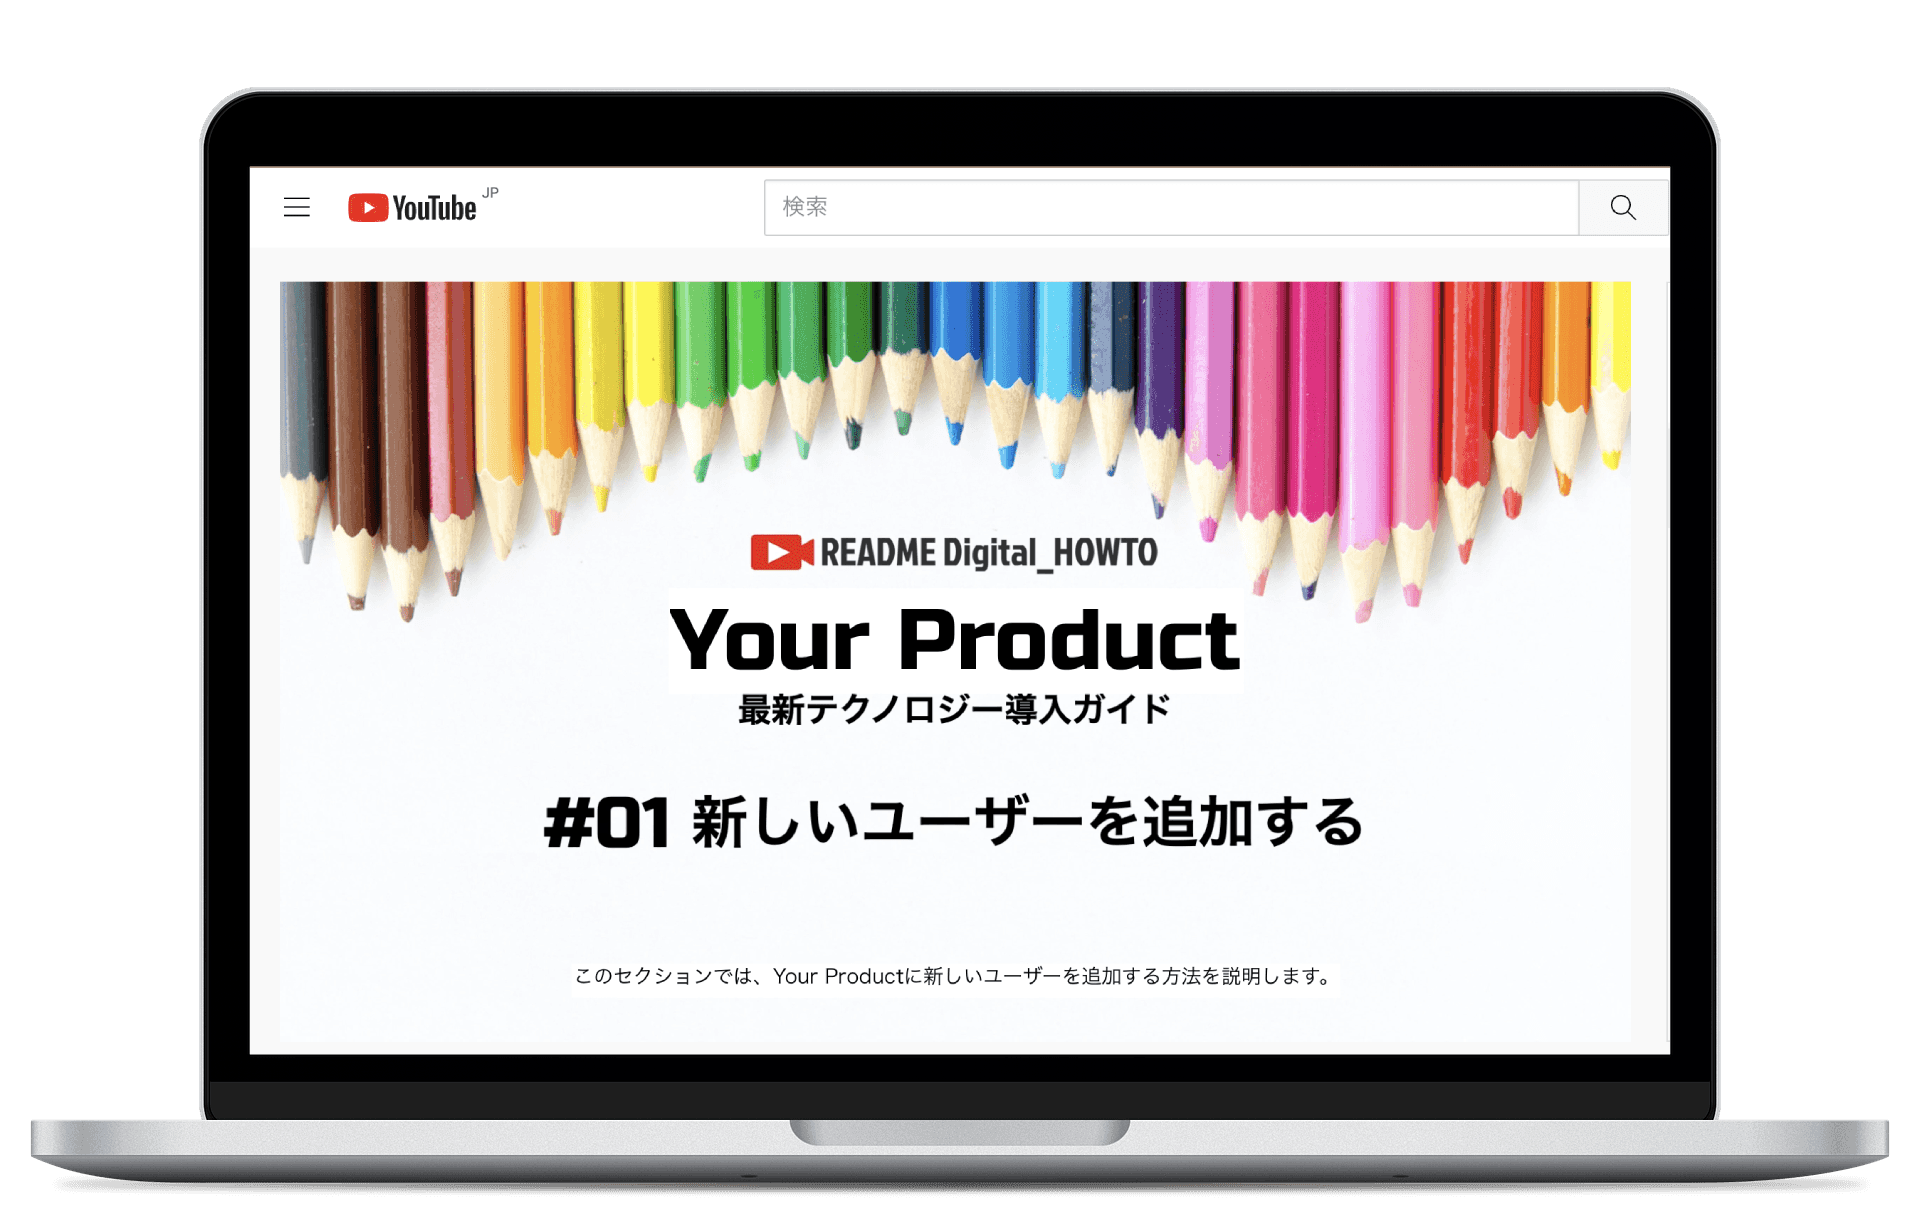 Publish your manual docs as an eBook in Japanese